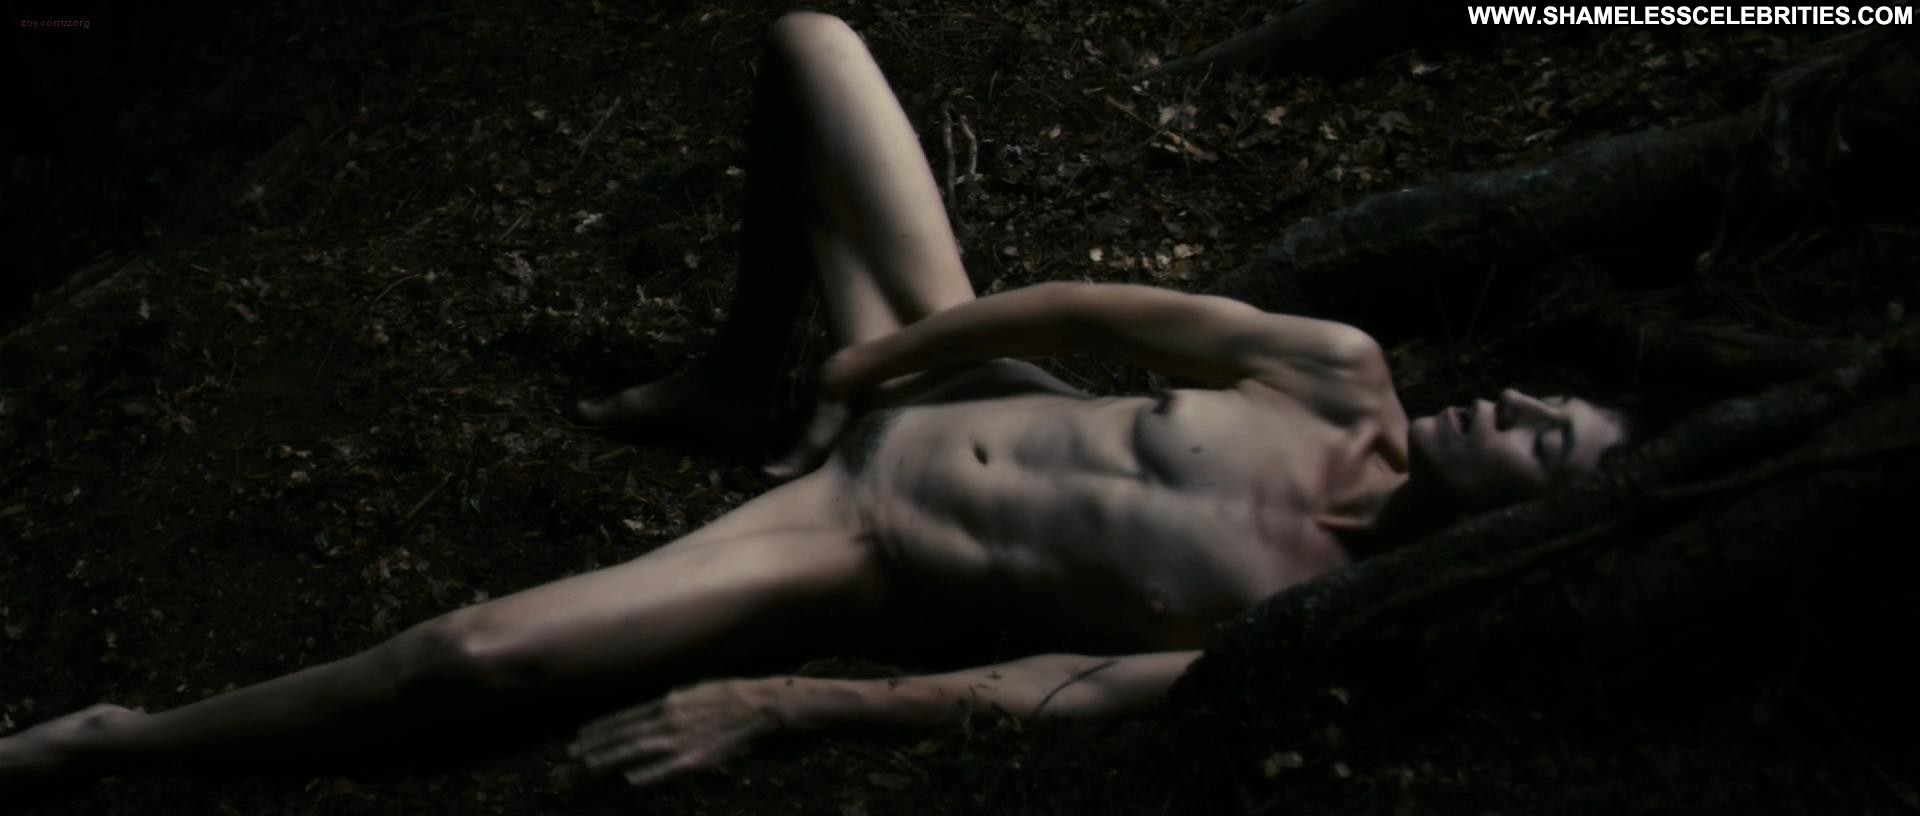 Charlotte Gainsbourg Antichrist Celebrity Posing Hot Movie Nude Topless Sex Full Frontal